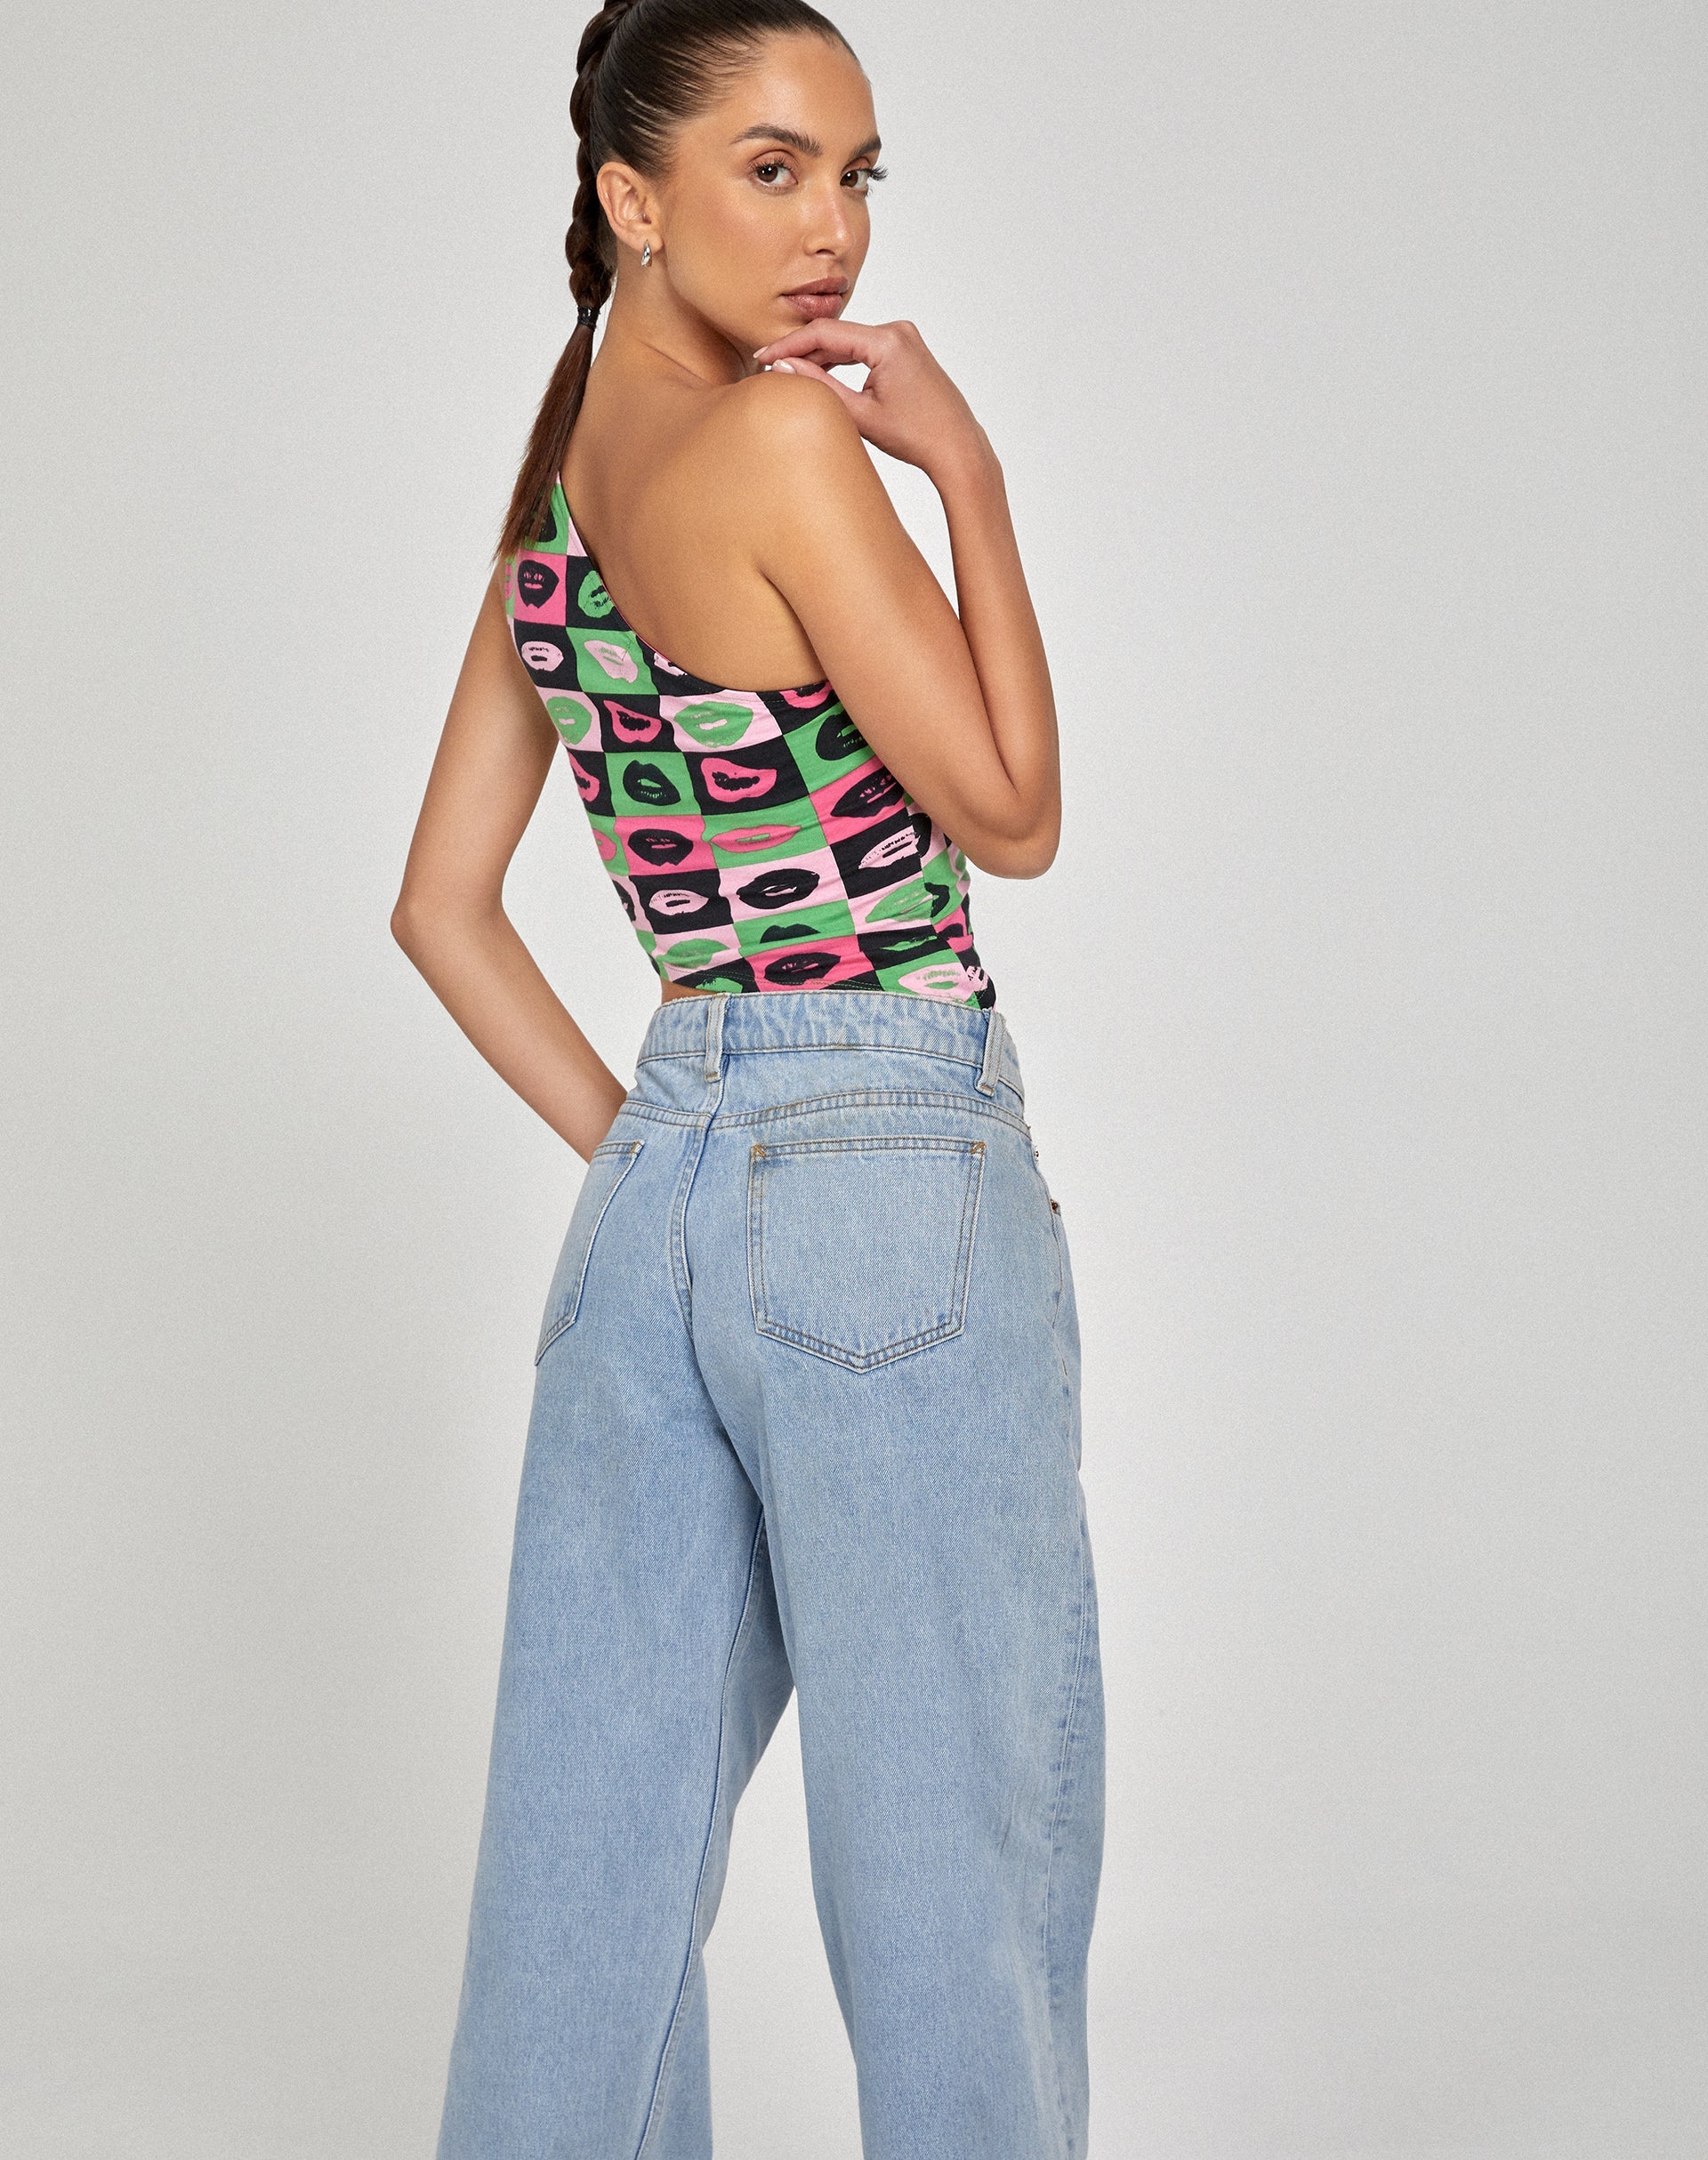 image of Bayva Crop Top in Lips Green